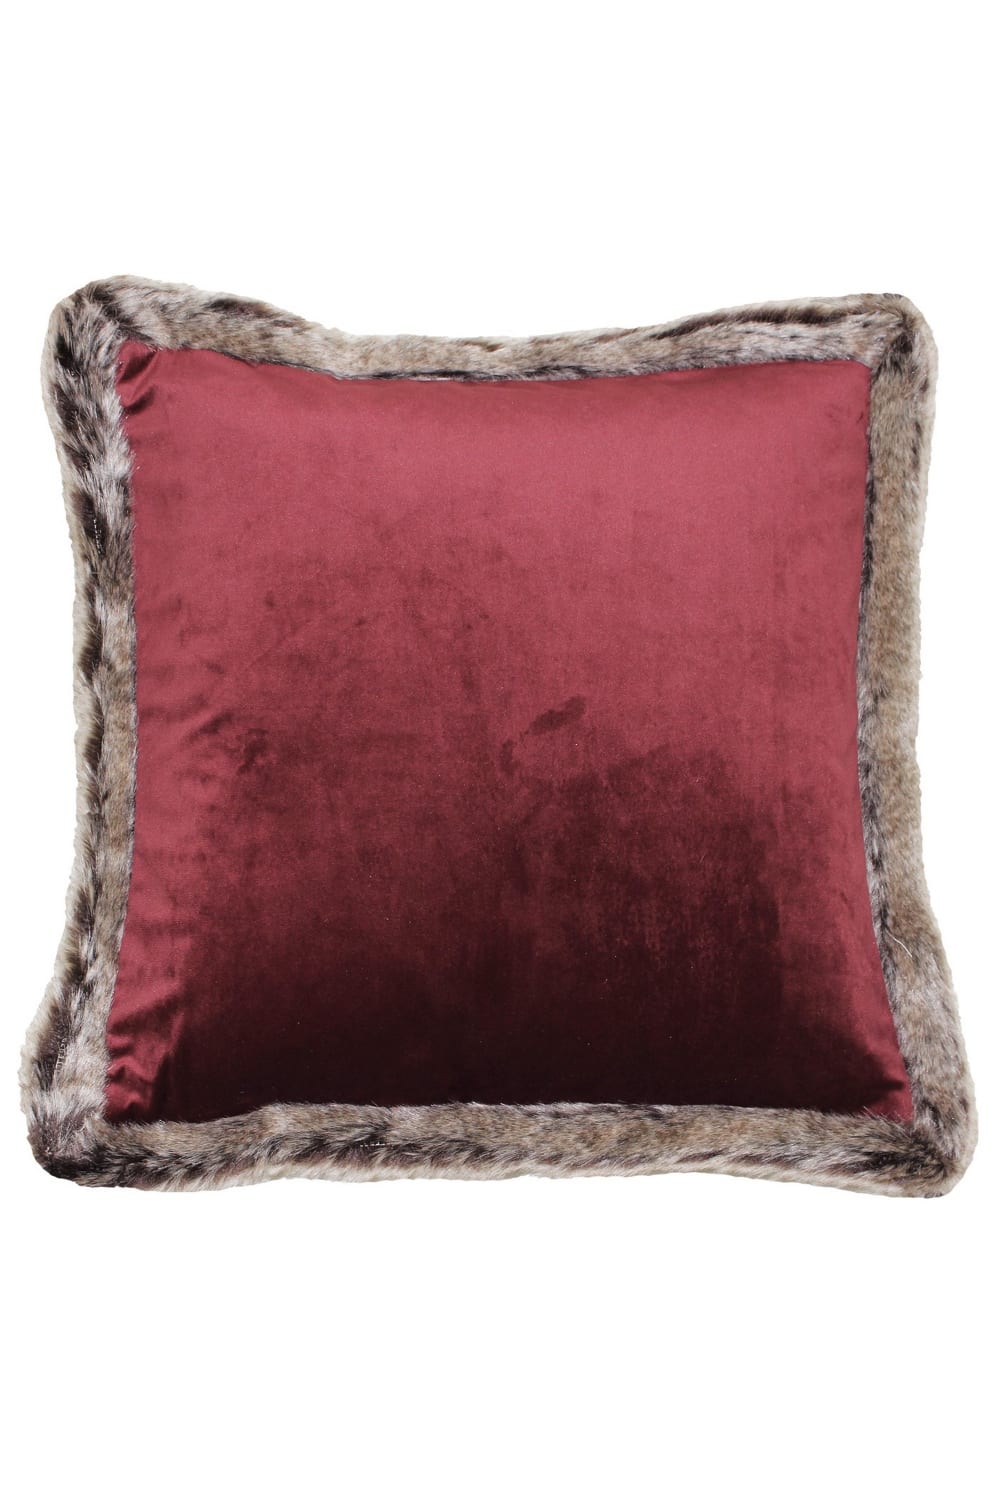 Riva Home Kiruna Faux Fur Edged Velvet Style Square Throw Pillow Cover (Cranberry) (17.7 X 17.7inch)